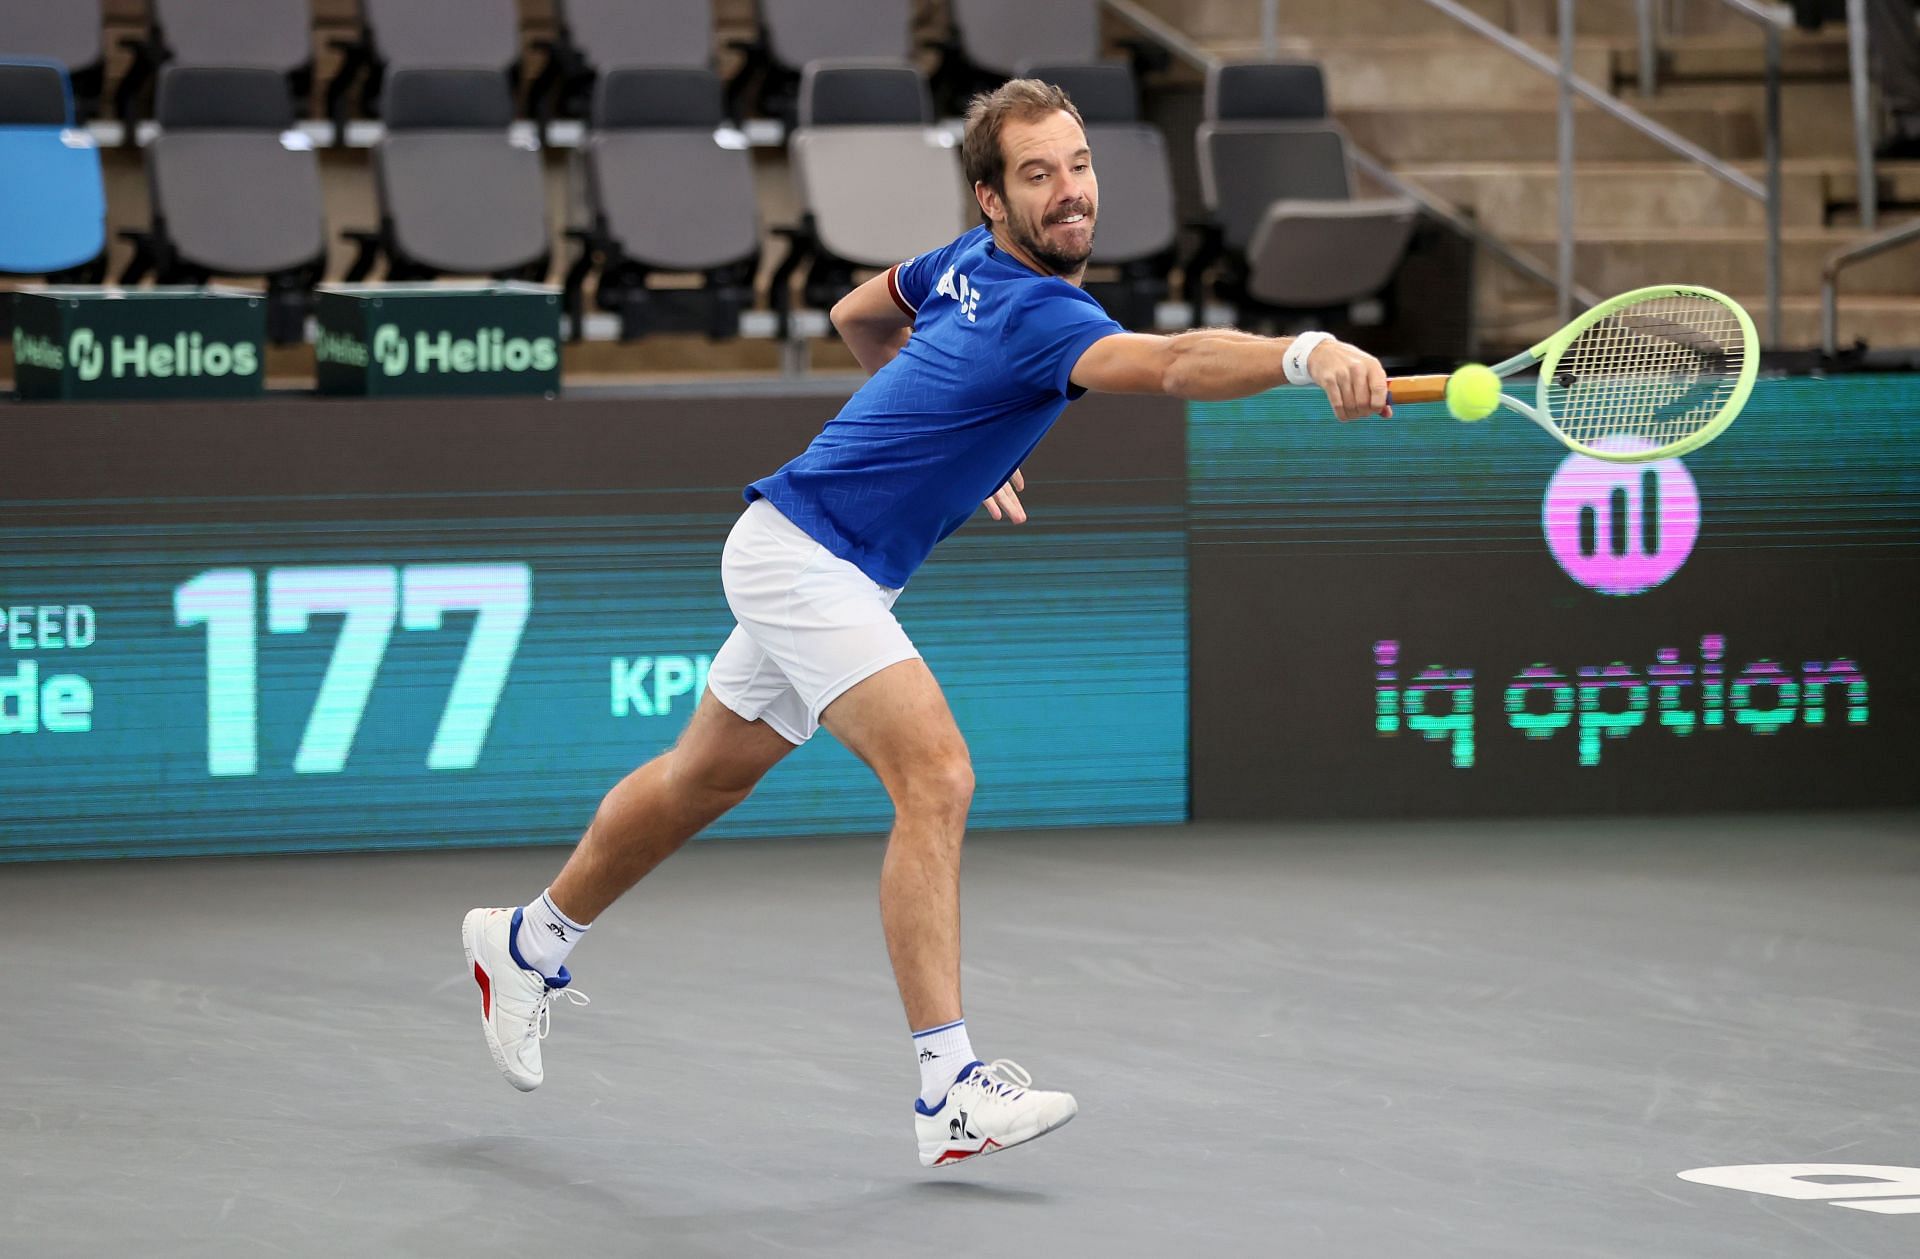 Richard Gasquet in action at the Davis Cup Finals